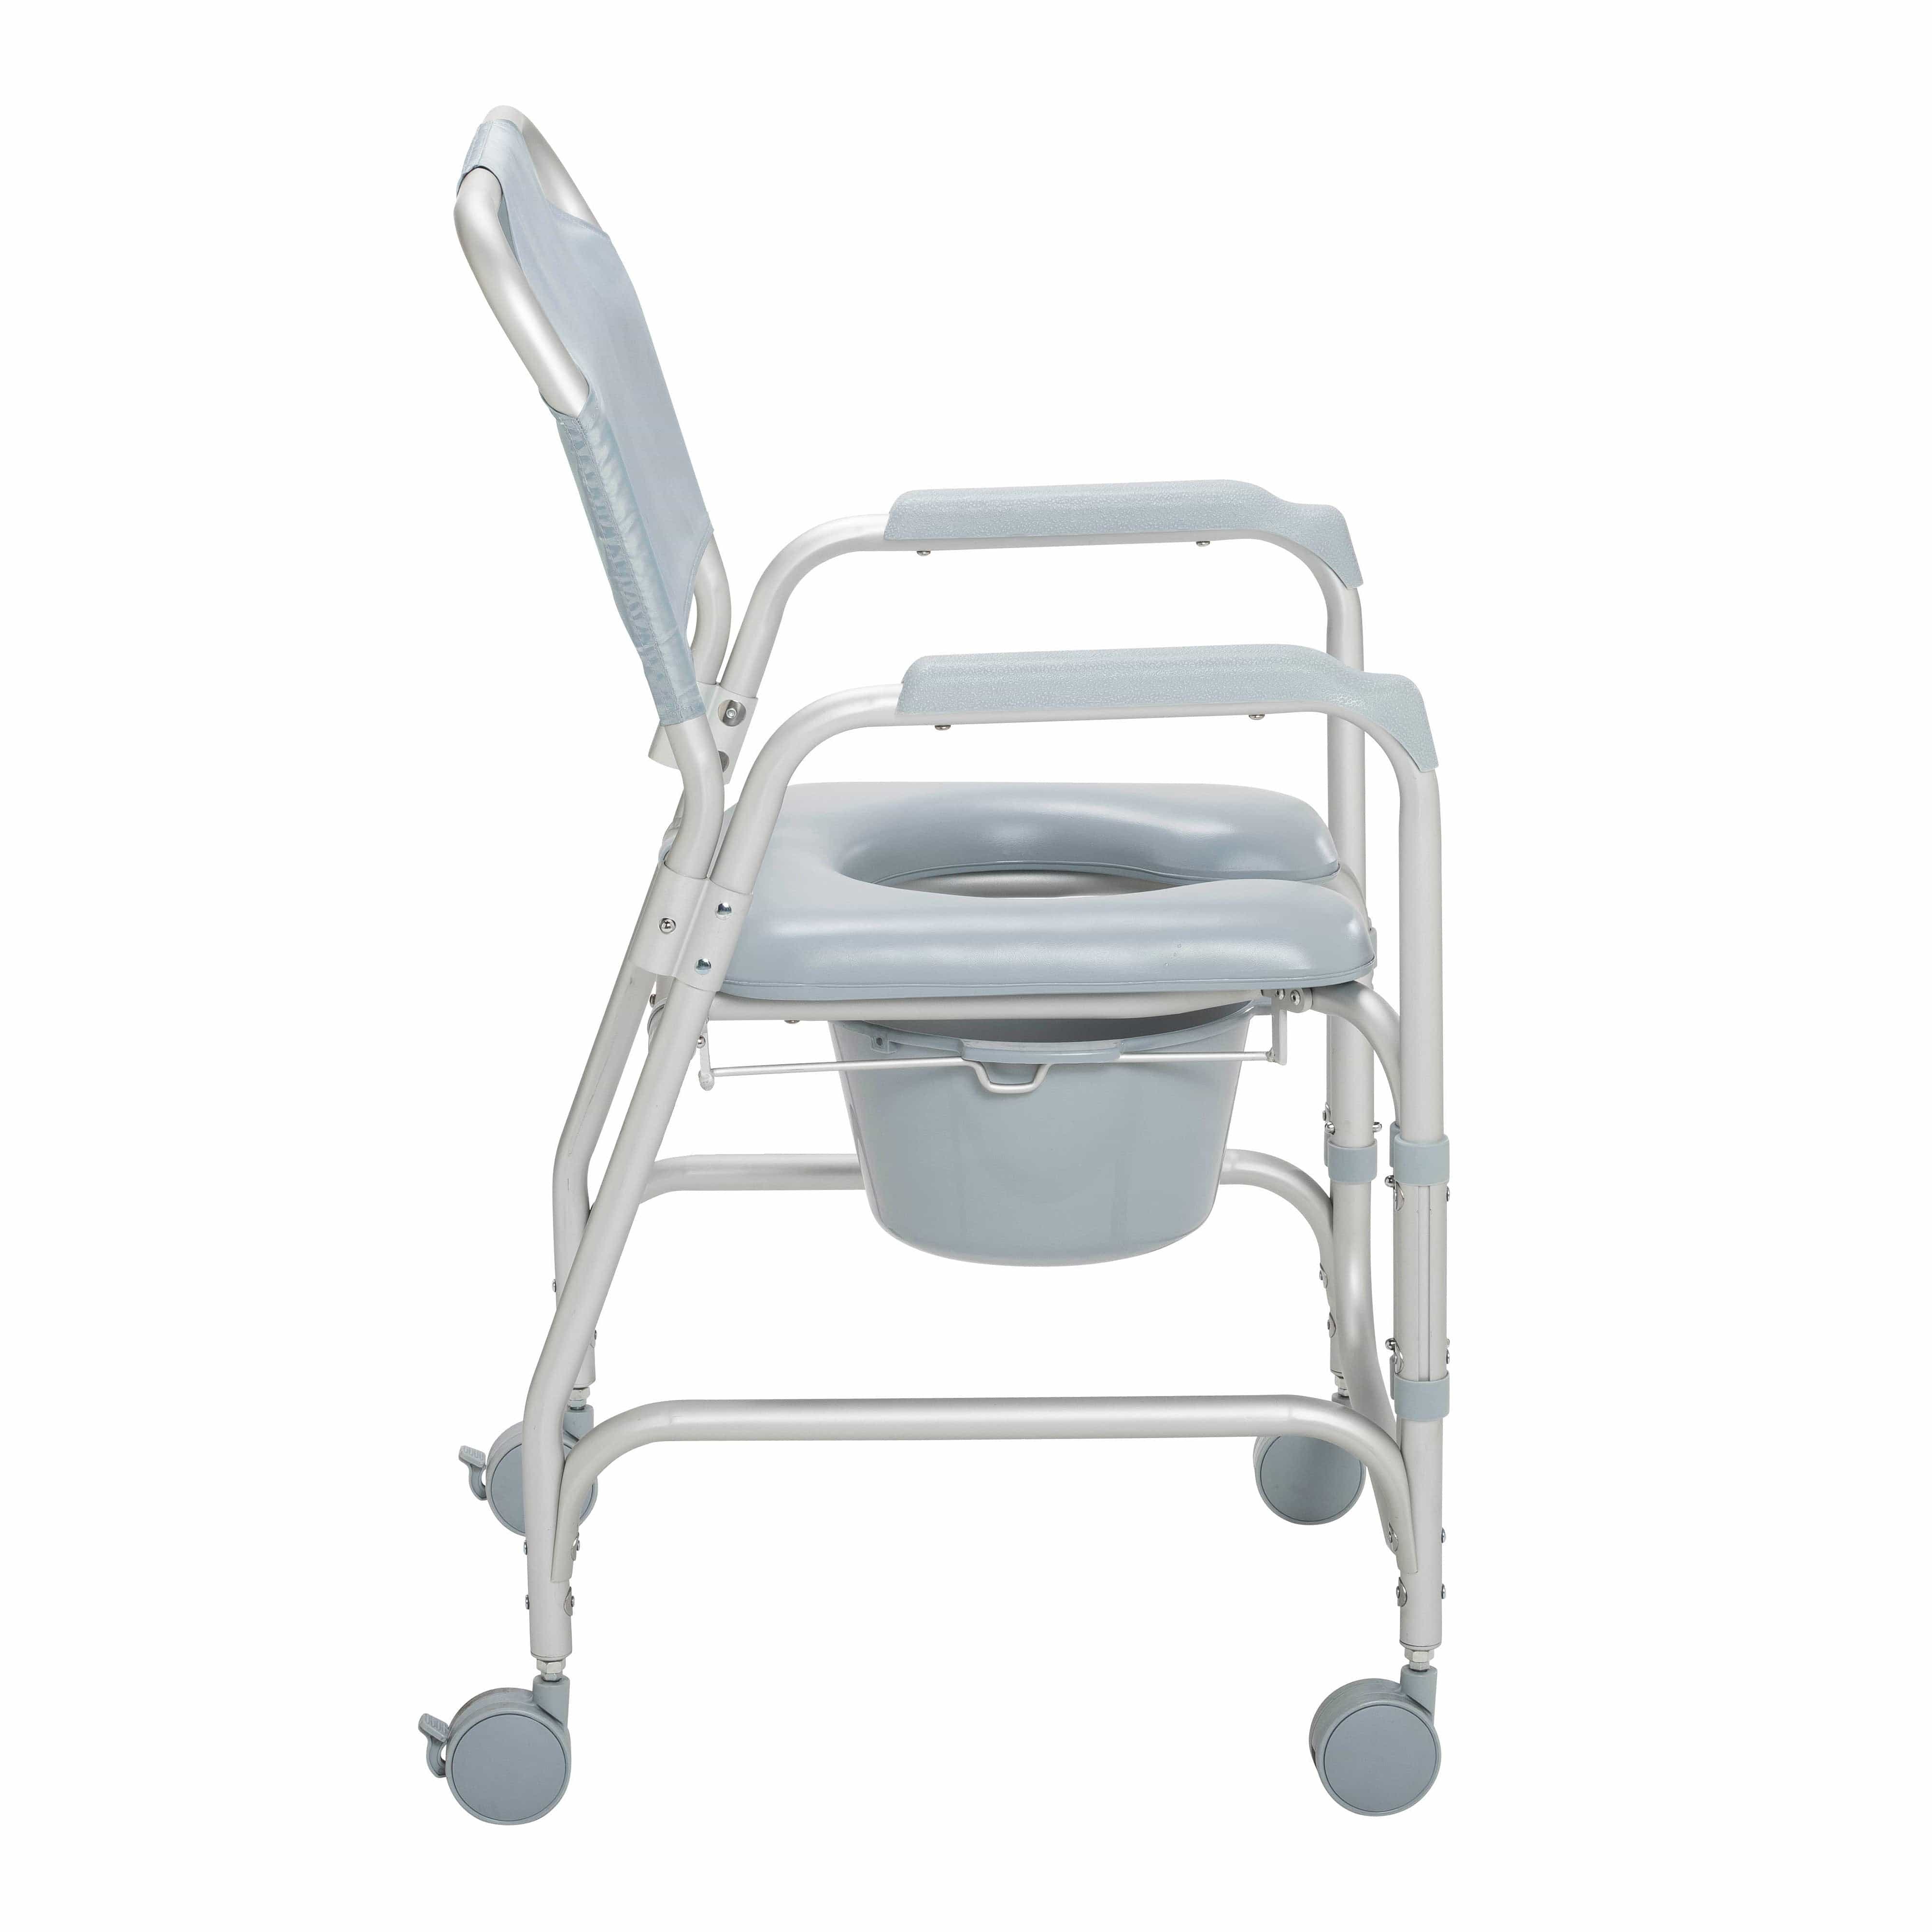 Drive Medical Drive Medical Lightweight Portable Shower Chair Commode with Casters 11114kd-1